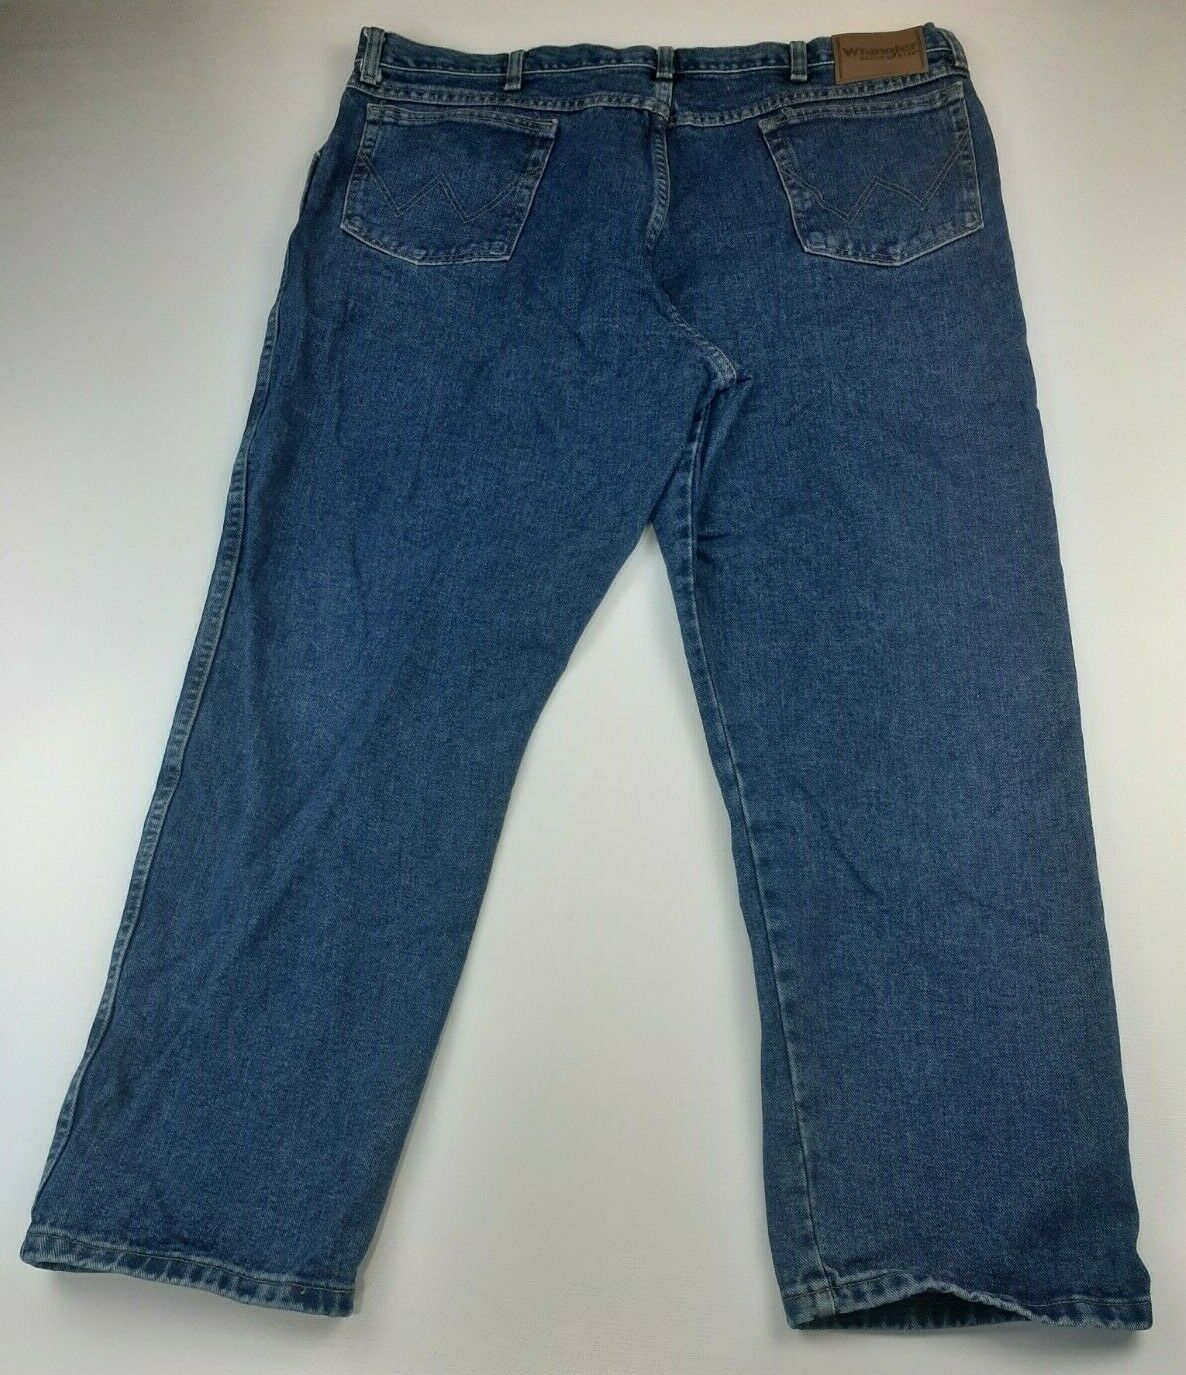 WRANGLER RUGGED WEAR RELAXED FIT (JIM) JEANS SZ 42 X 29 - Jeans